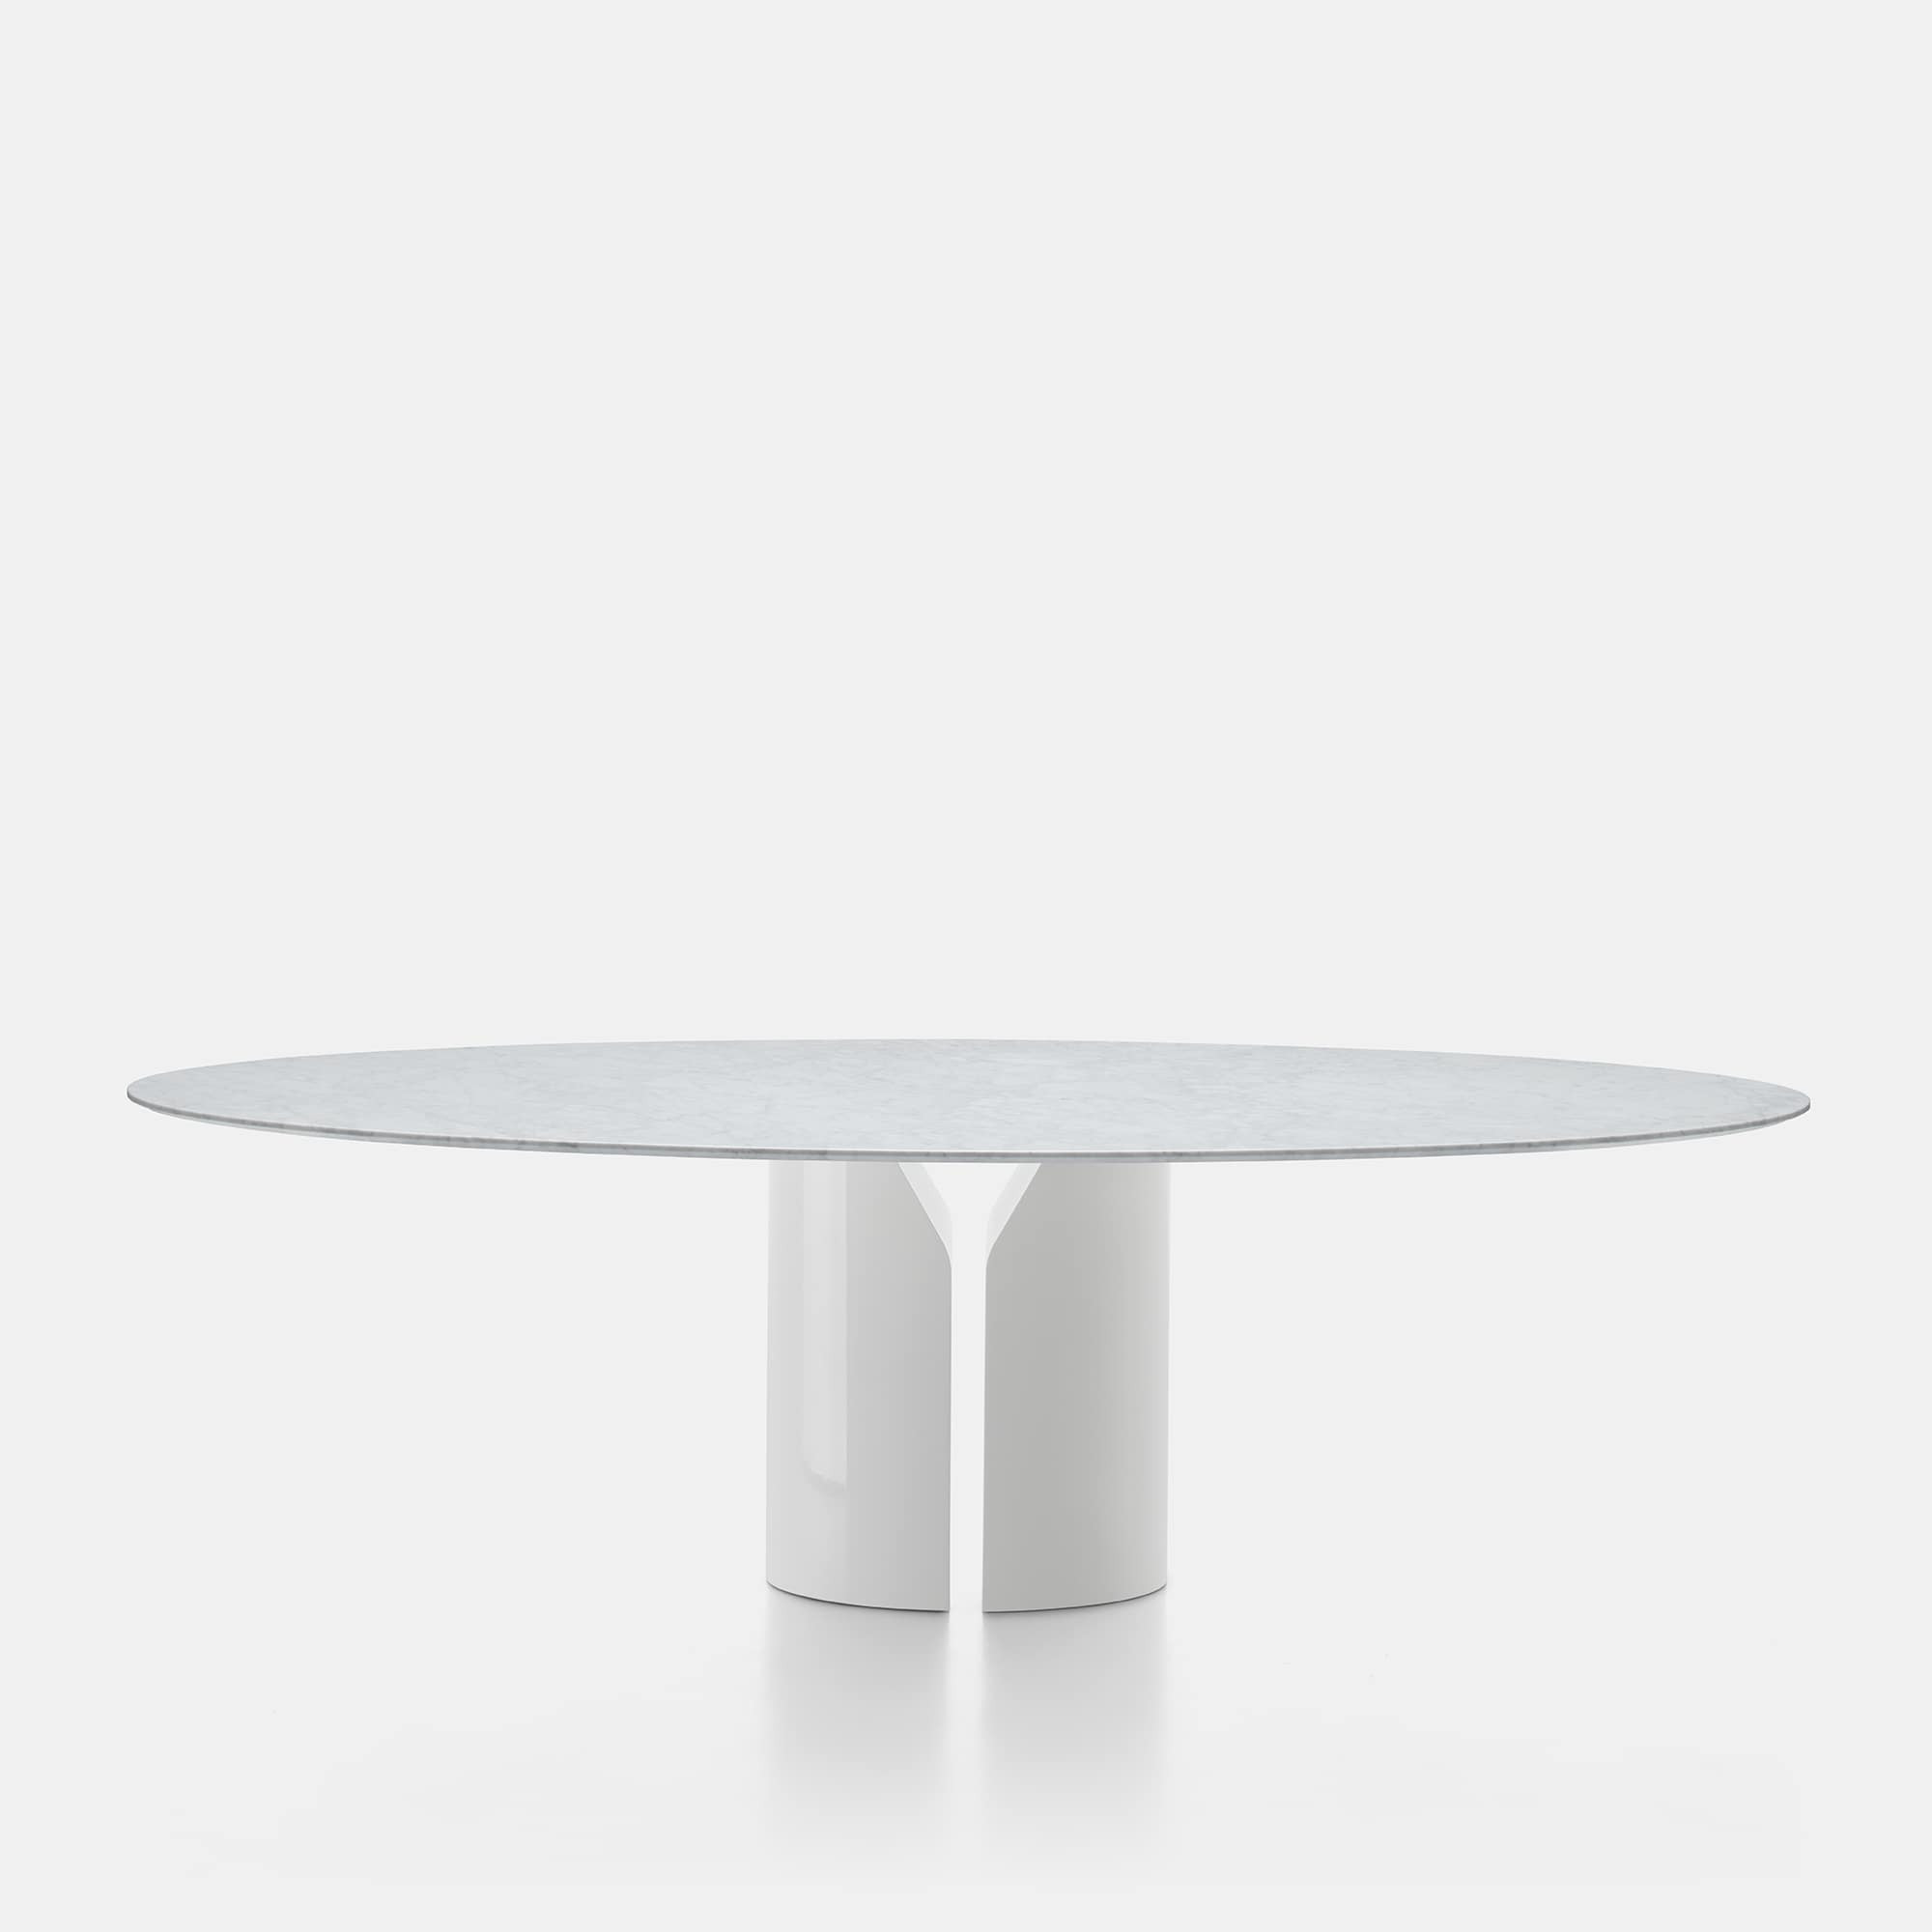 NVL Table ☞ Structure: Reconstructed Stone White Calce X131 ☞ Top: Reconstructed Stone White Calce X131